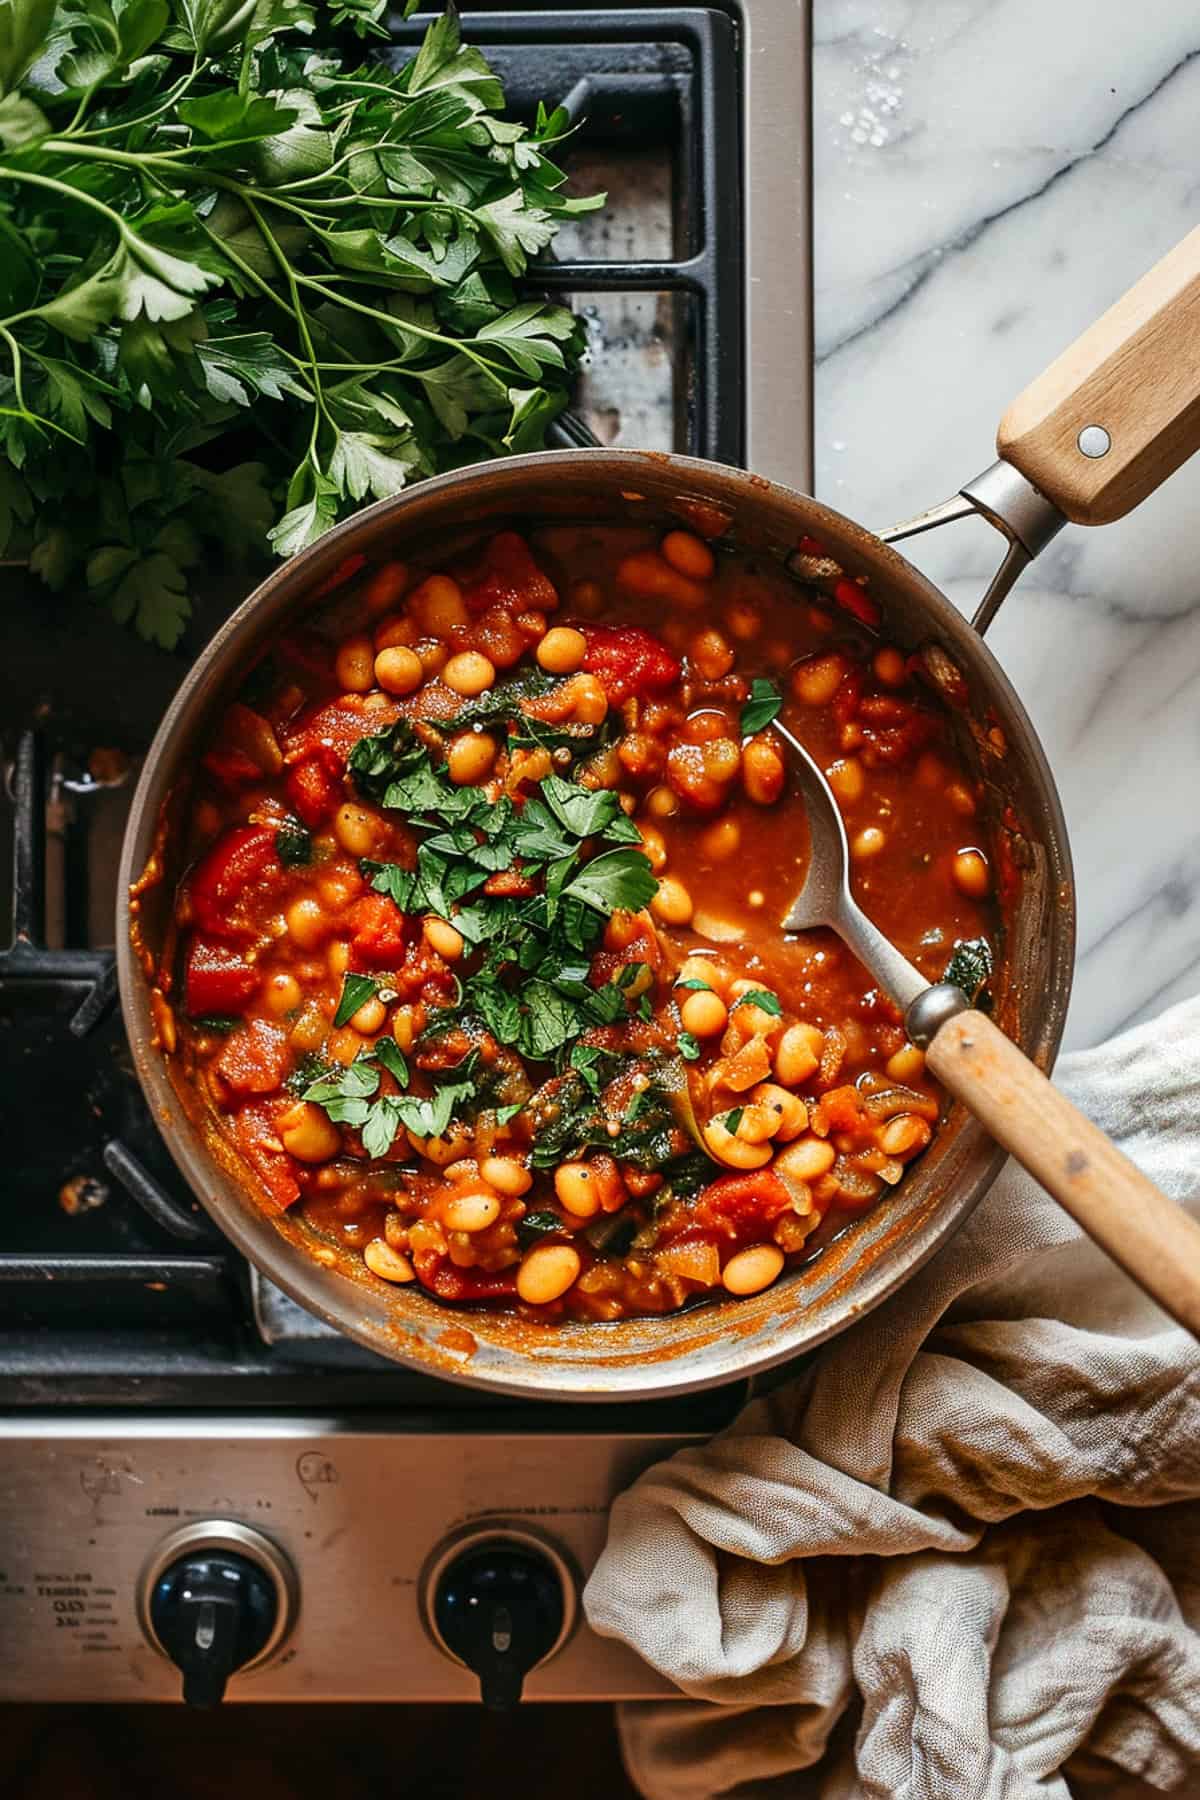 Smoky Moroccan bean stew with cilantro and tomatoes, cooking on the stove.